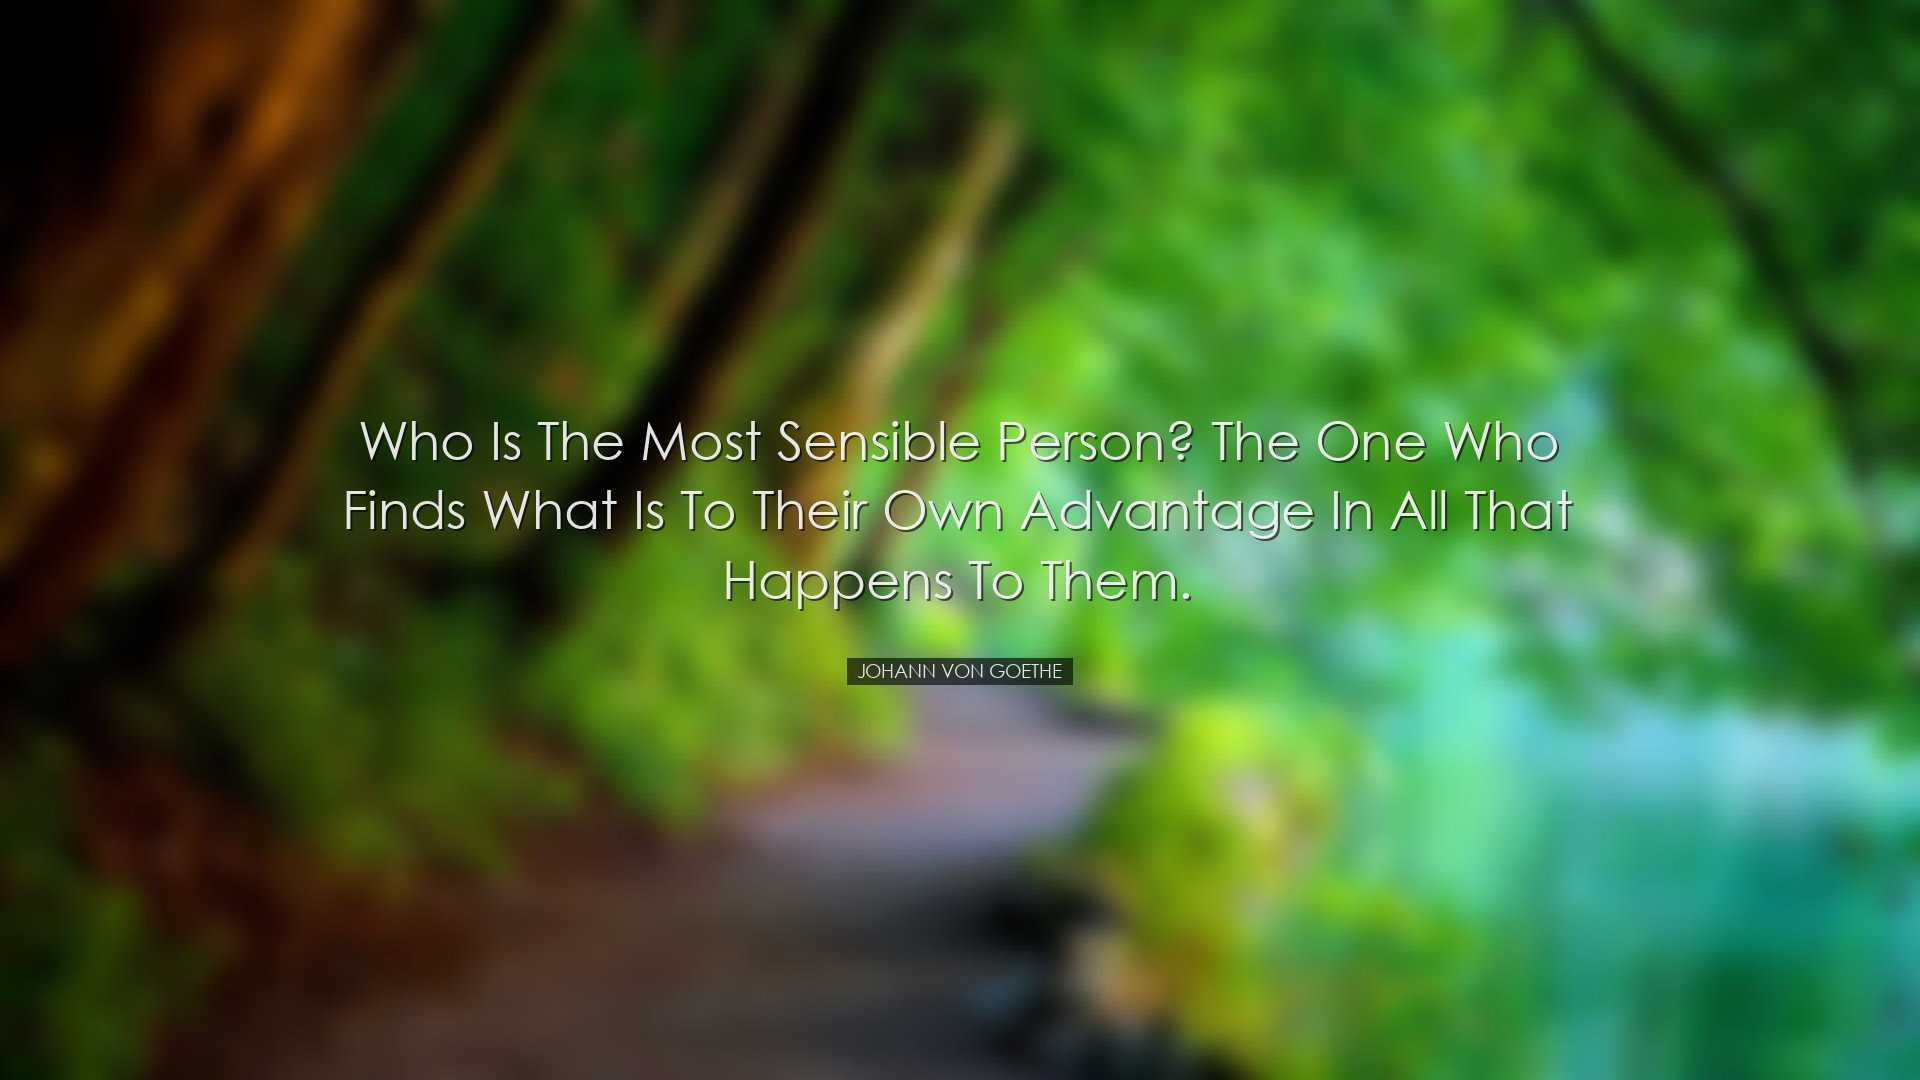 Who is the most sensible person? The one who finds what is to thei